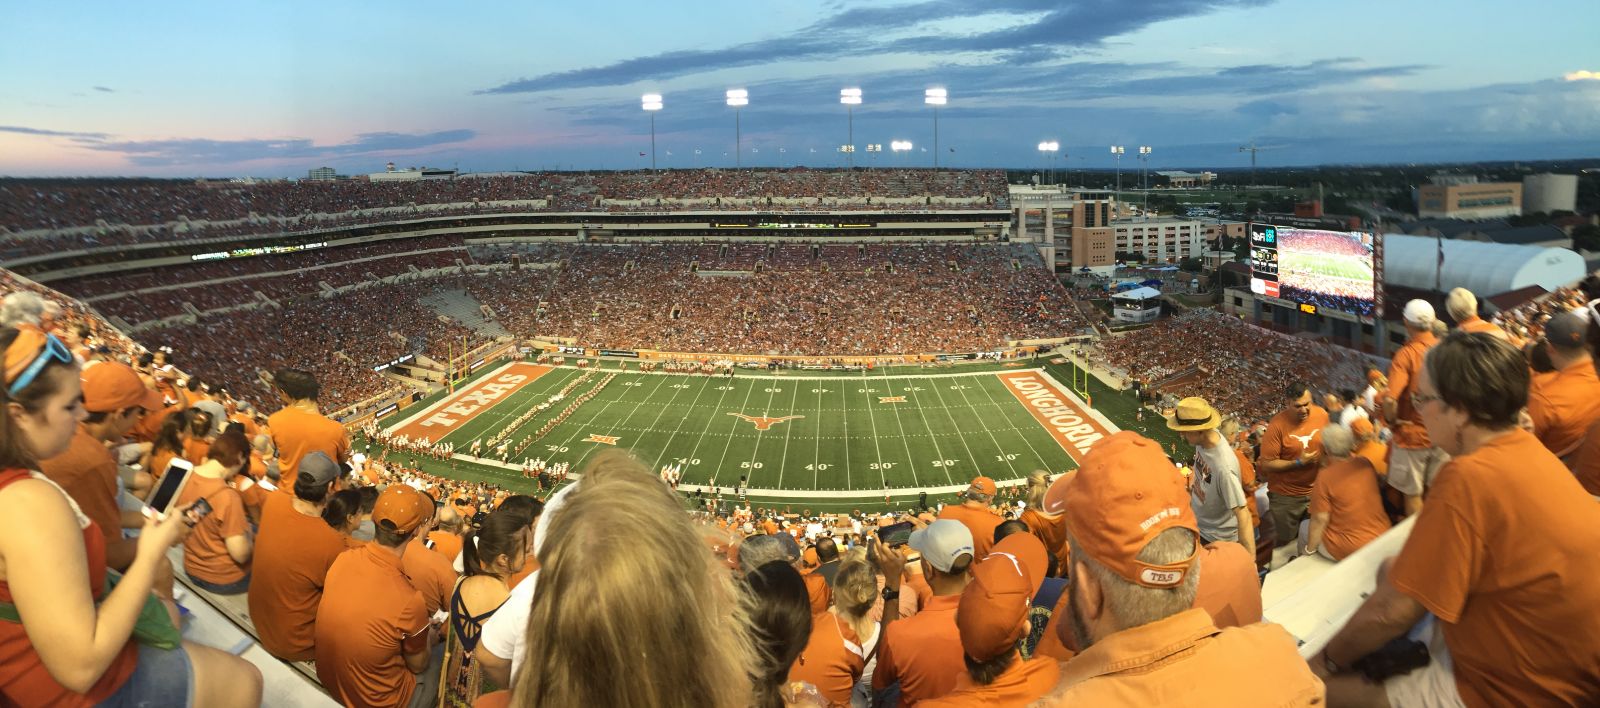 section 104, row 35 seat view  - dkr-texas memorial stadium